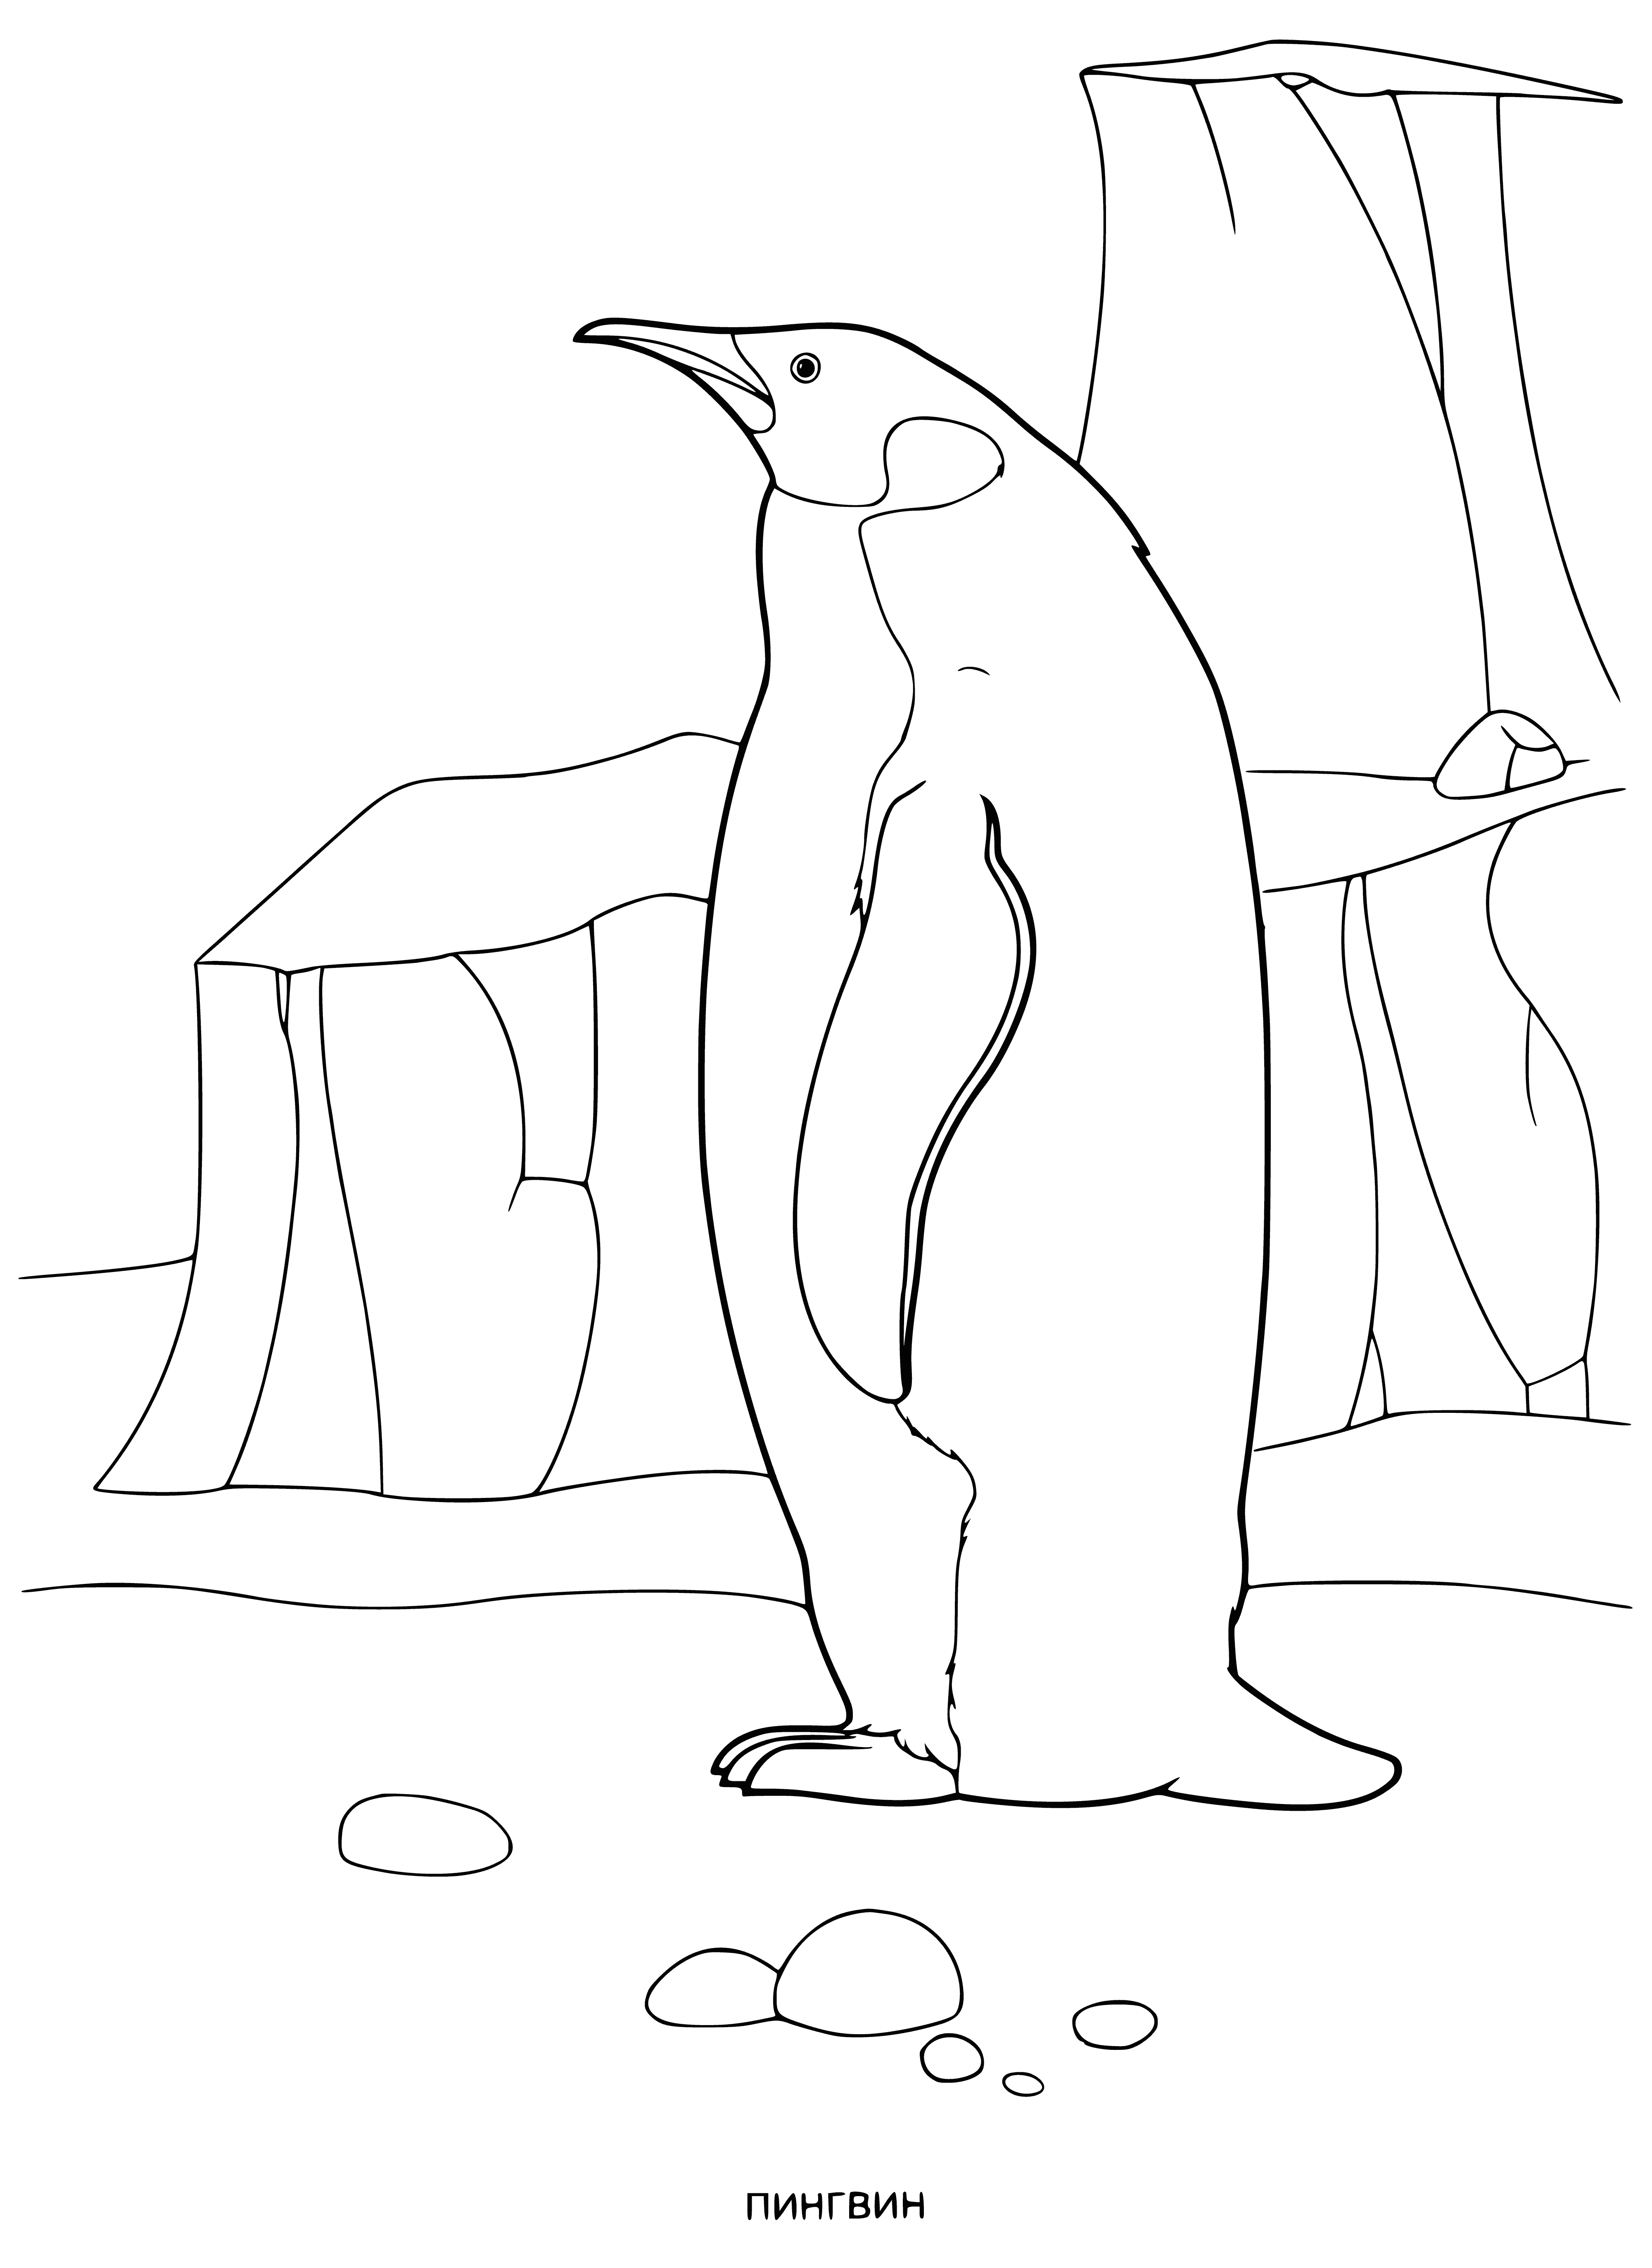 coloring page: Black-backed white-fronted bird with black head, long beak, white face and small black wings and feet.